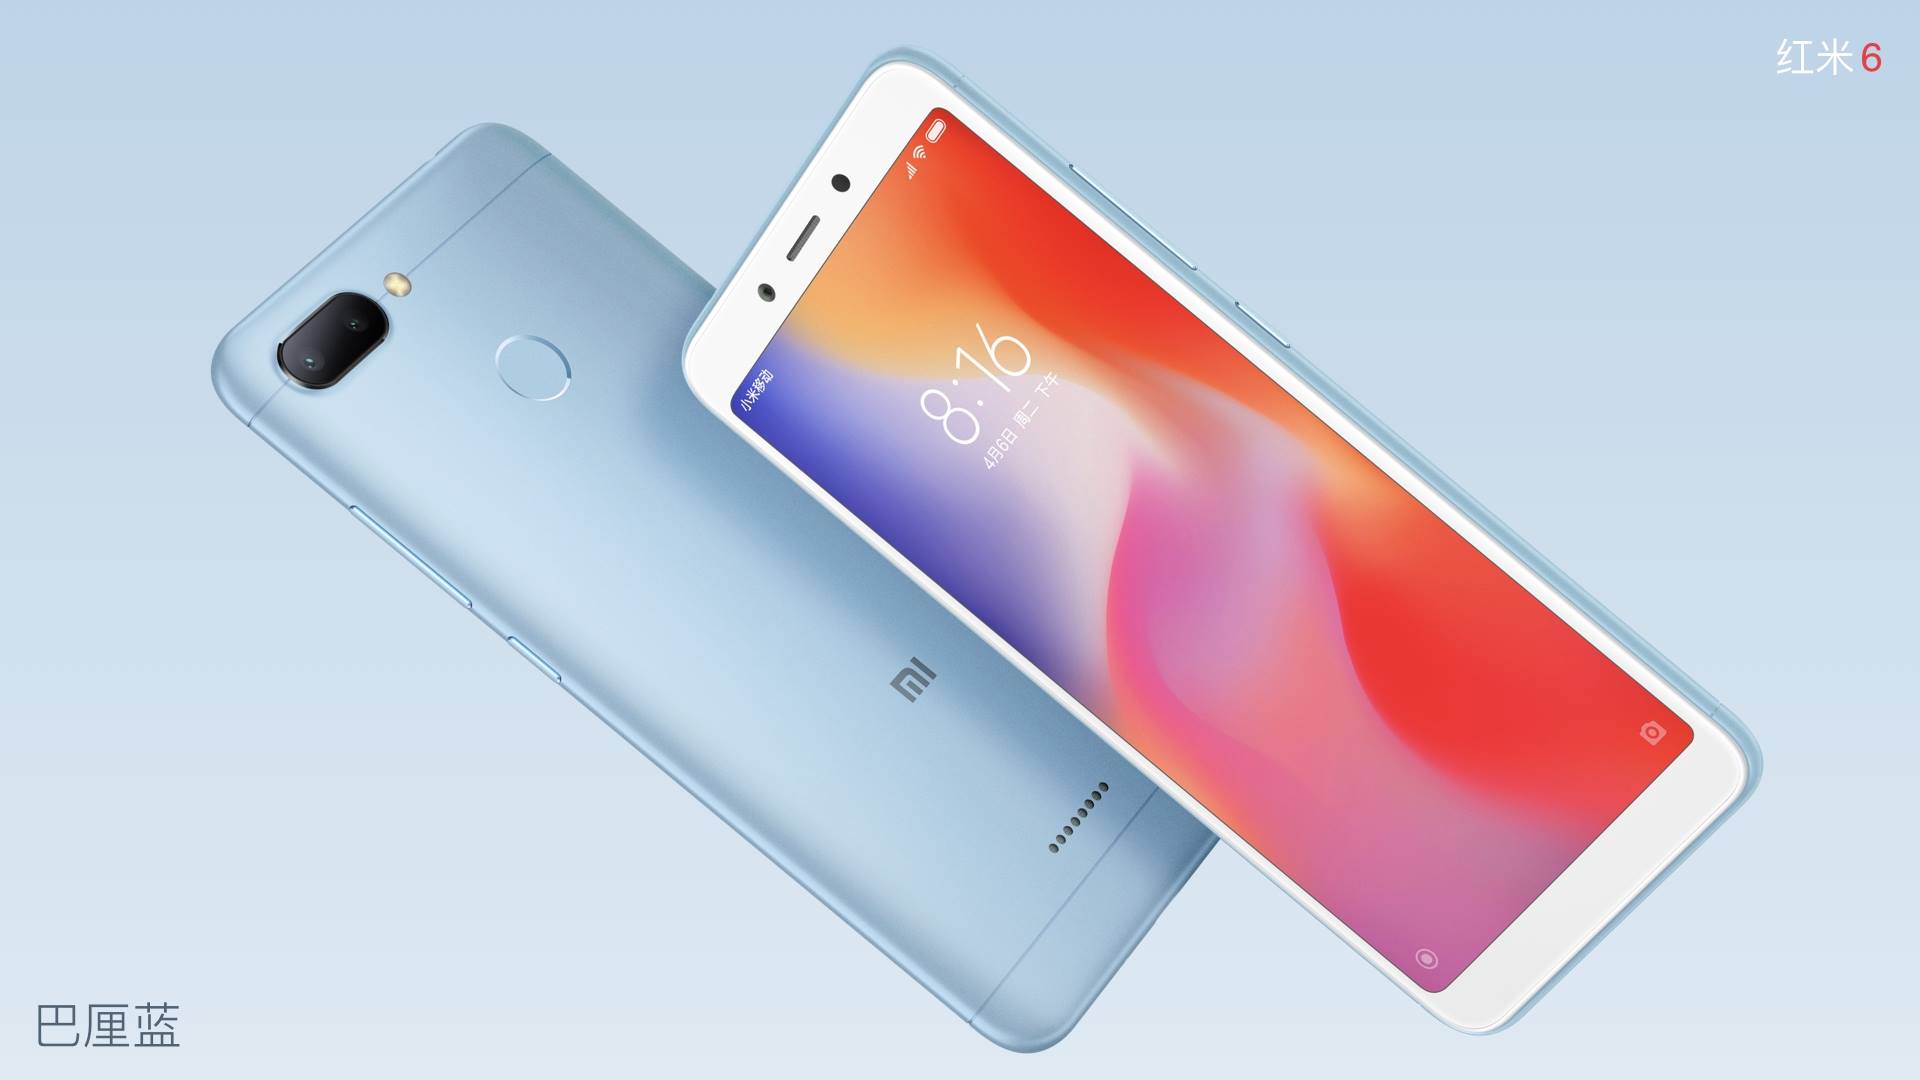 Xiaomi Redmi 6, Redmi 6A launch highlights: Price, specifications and